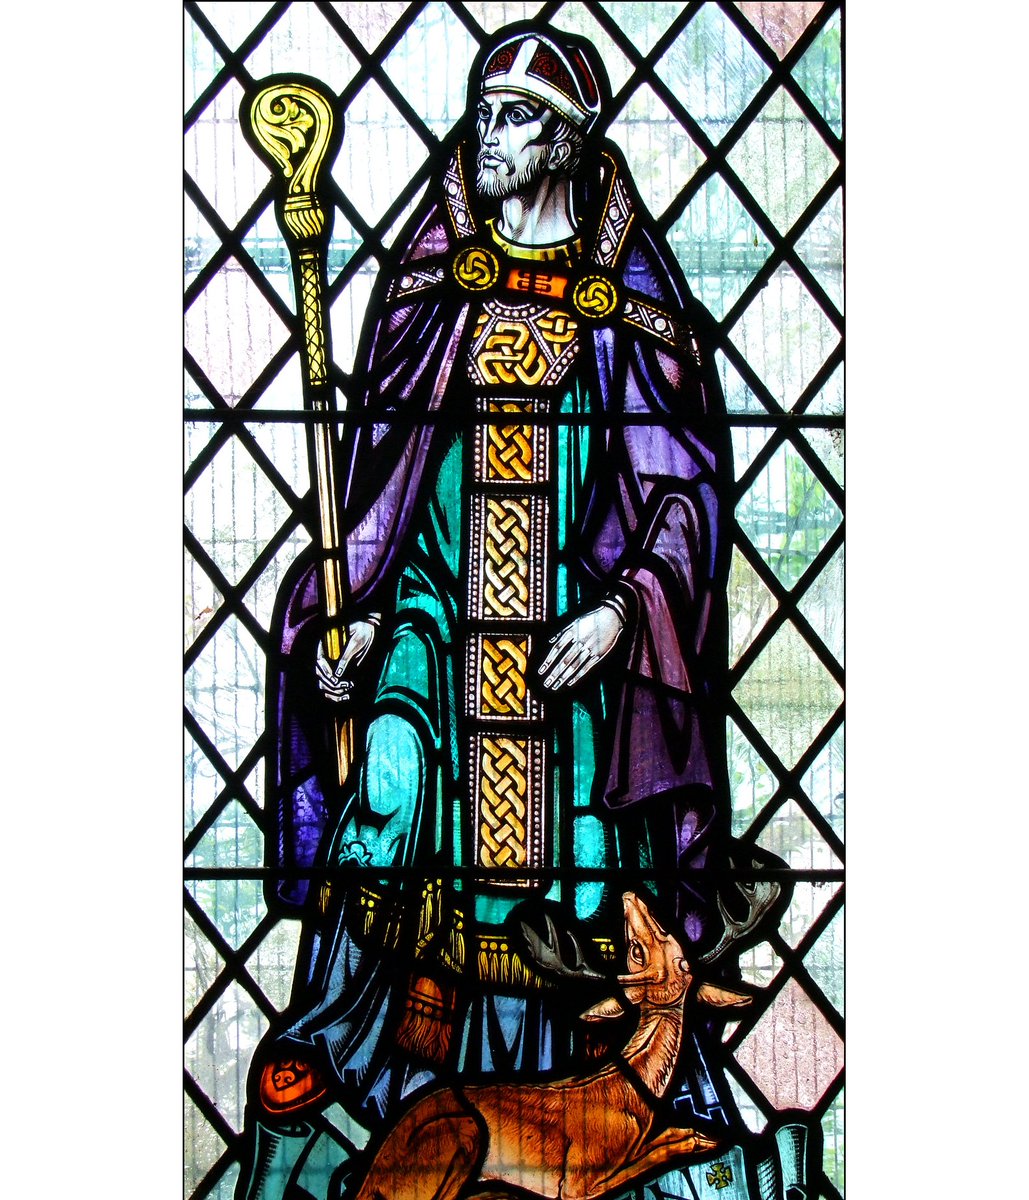 Today is the feast of St Aidan of Northumbria, here in glass by Rupert Moore at Kirby le Soken, Essex and by King & Son at St Mark, Norwich, both 1960s, both churches with a range of glass of the English saints.

Kirby:  simonknott.co.uk/essexchurches/…
St Mark: norfolkchurches.co.uk/norwichmarklak…